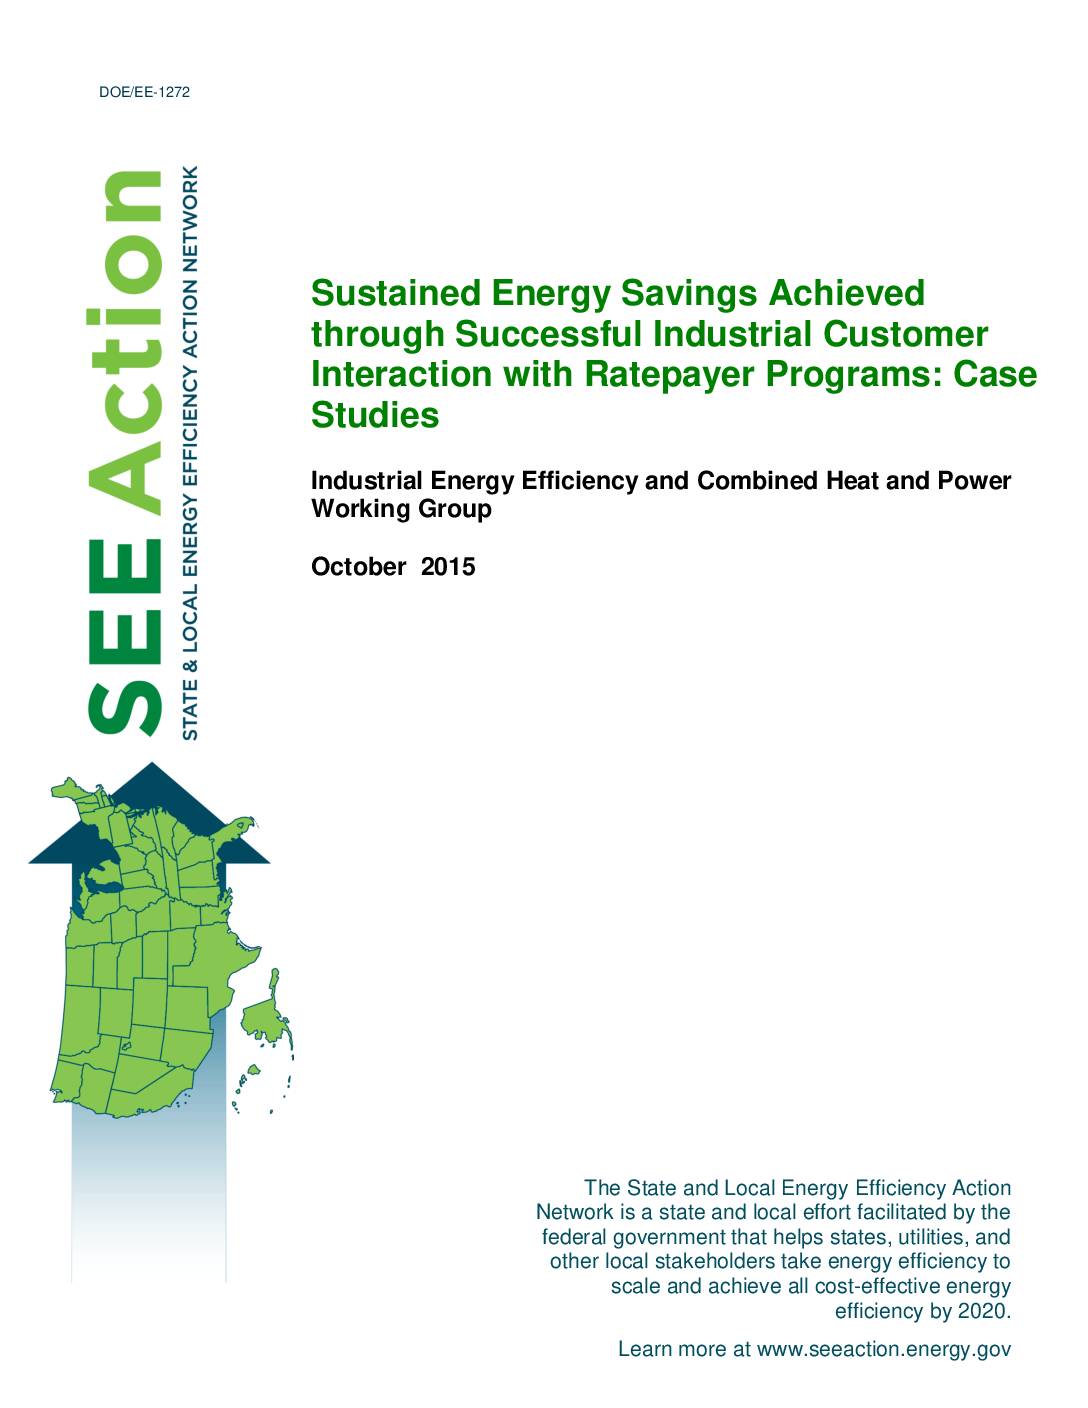 Sustained Energy Savings Achieved through Successful Industrial Customer Interaction with Ratepayer Programs: Case Studies